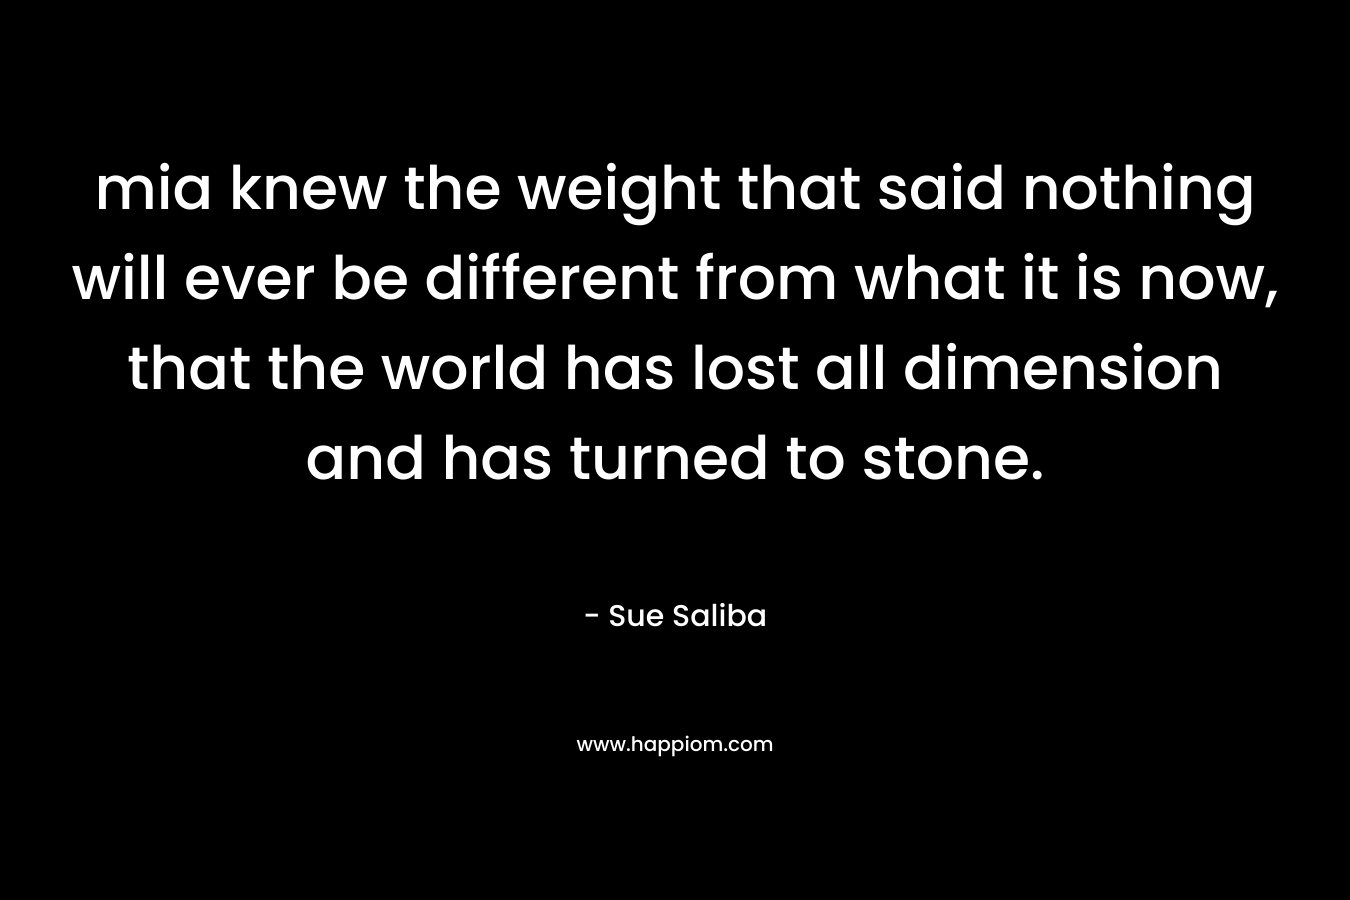 mia knew the weight that said nothing will ever be different from what it is now, that the world has lost all dimension and has turned to stone. – Sue Saliba